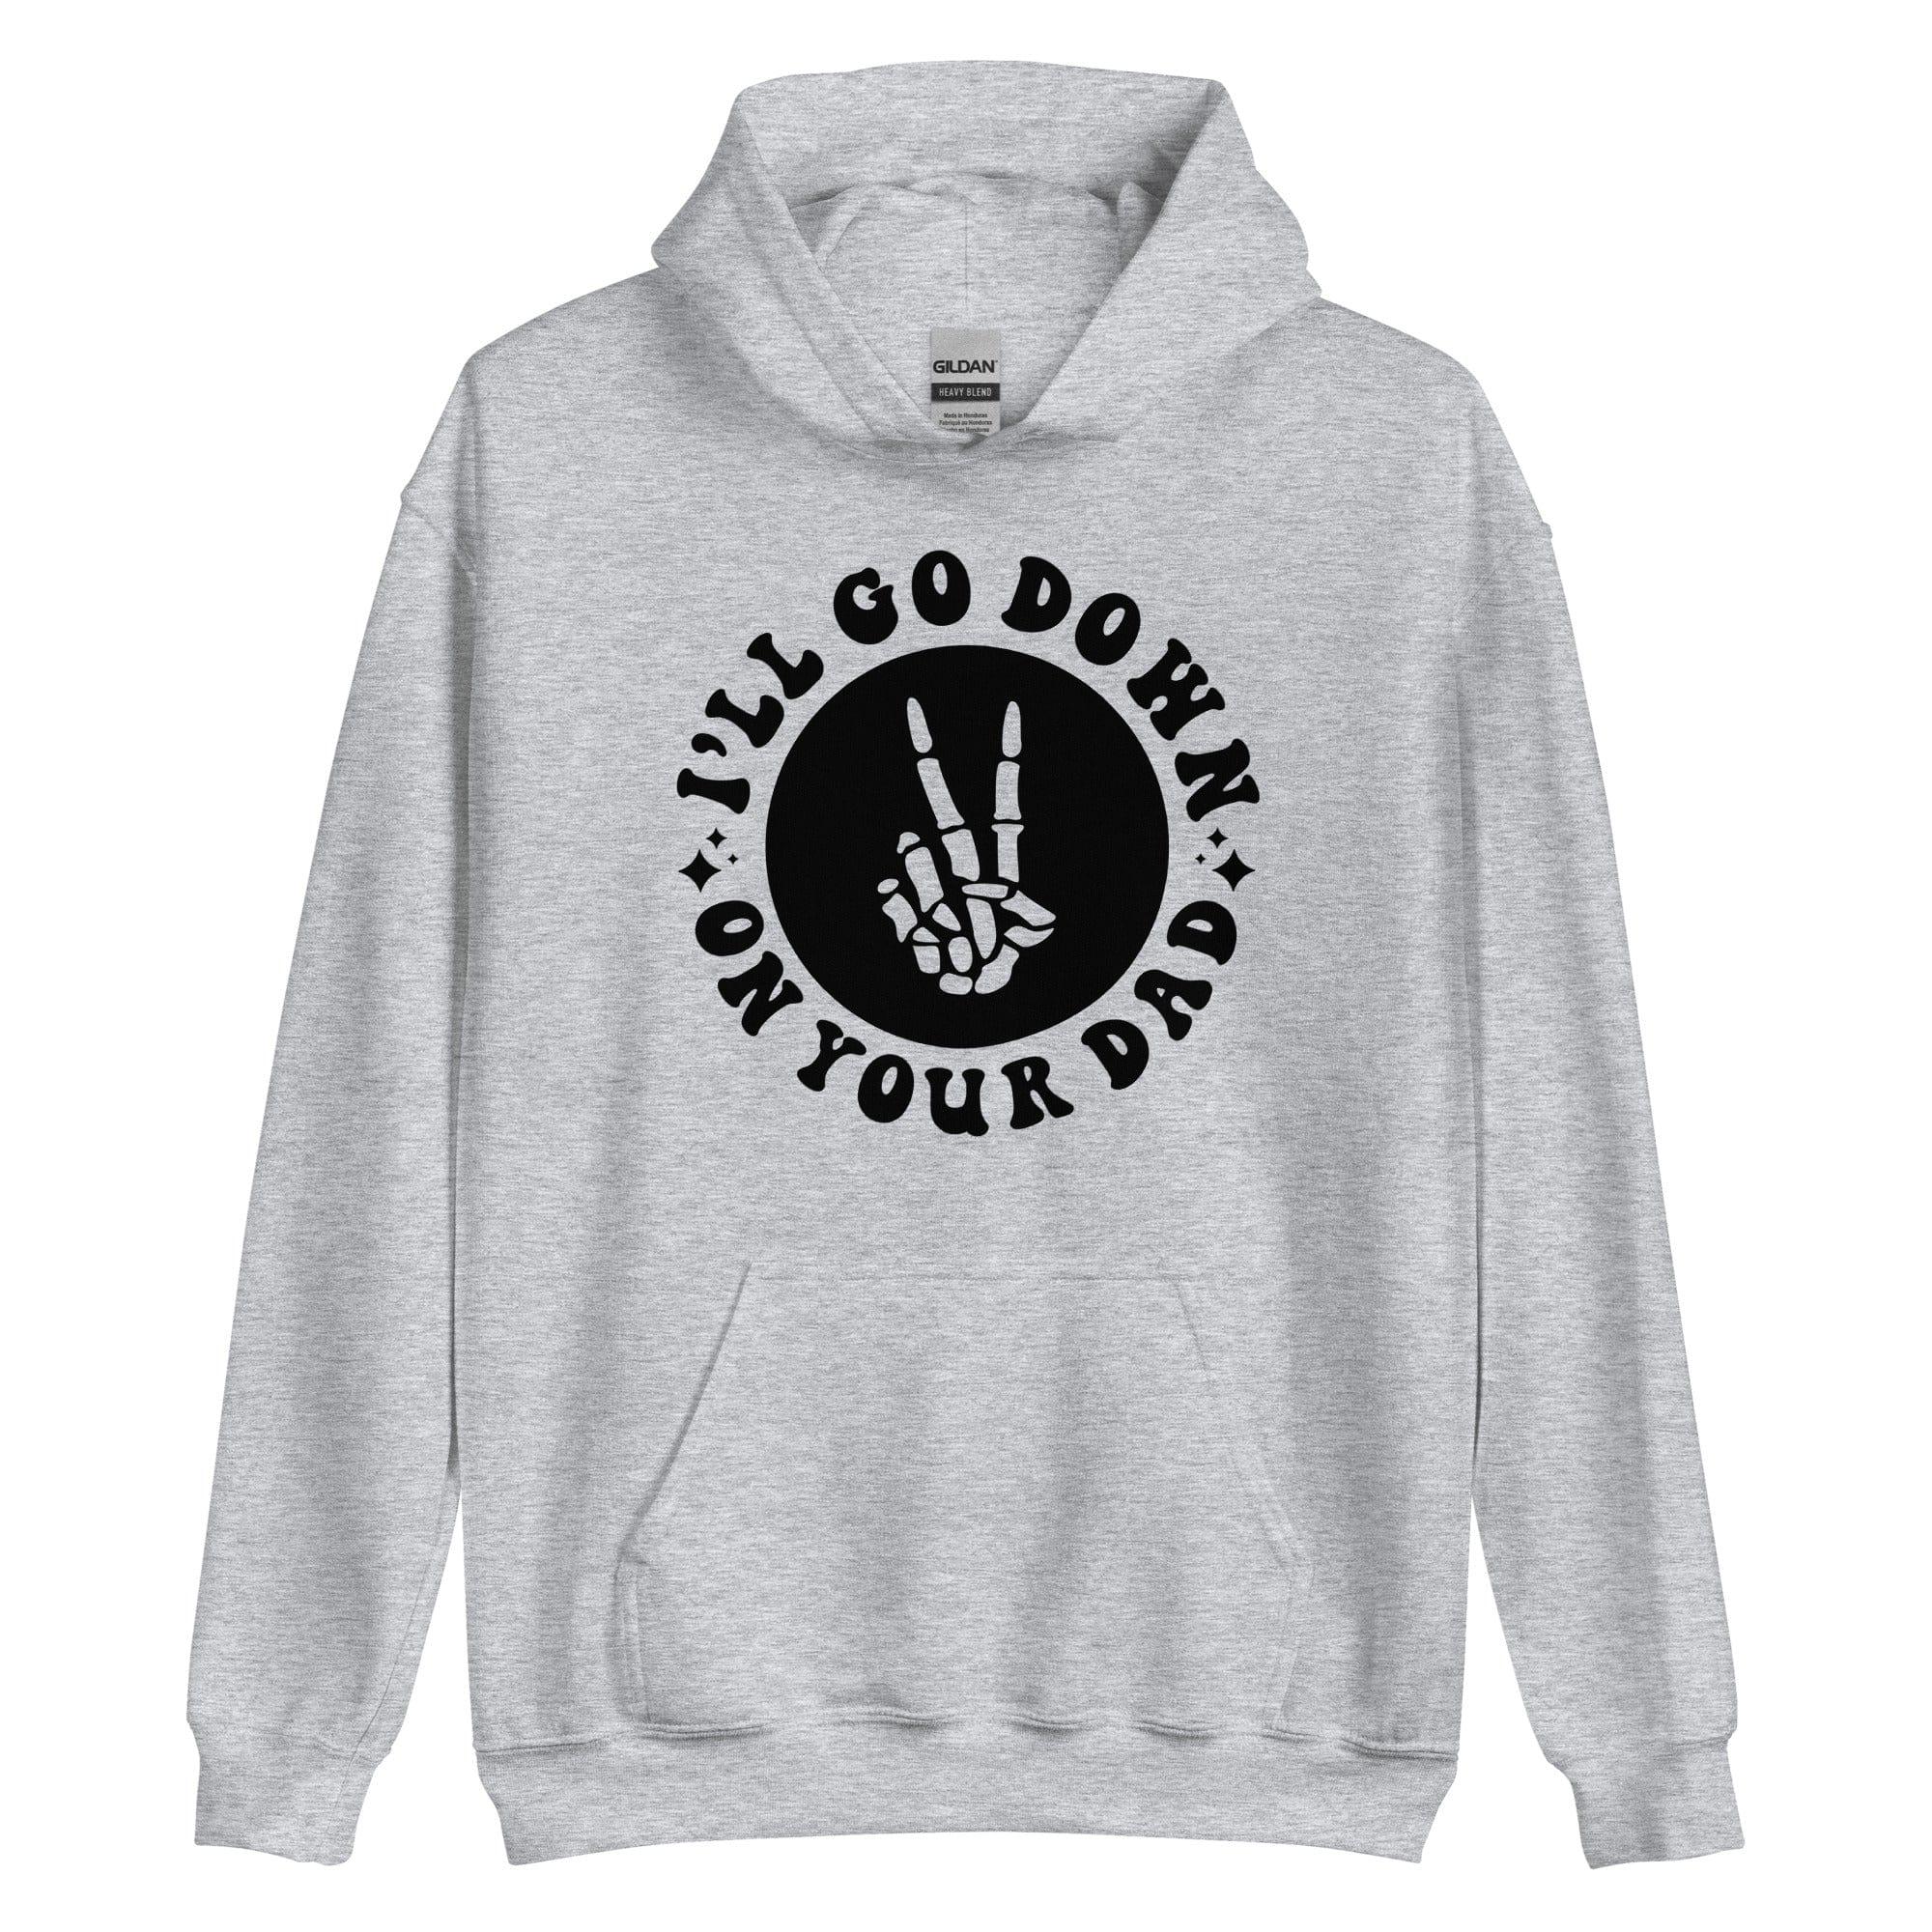 Humor Hoodie I'll Go Down on Your Dad with Peace Sign - TopKoalaTee